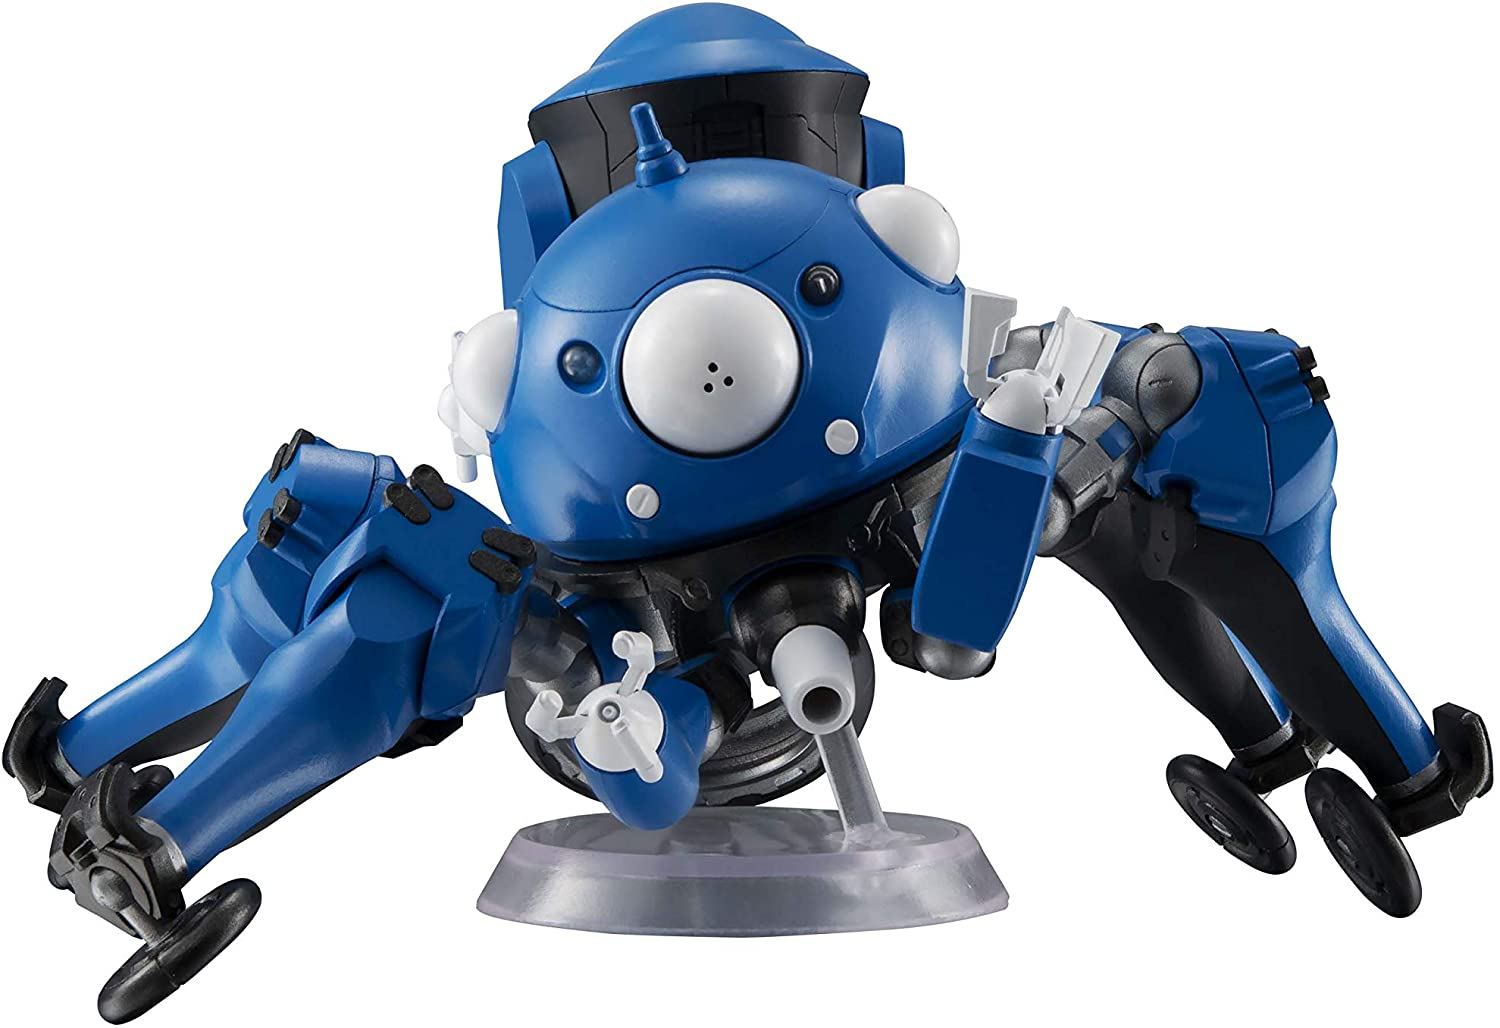 ROBOT SPIRITS SIDE GHOST GHOST IN THE SHELL SAC_2045: TACHIKOMA -GHOST IN THE SHELL SAC_2045- Tamashii (Bandai Toys)